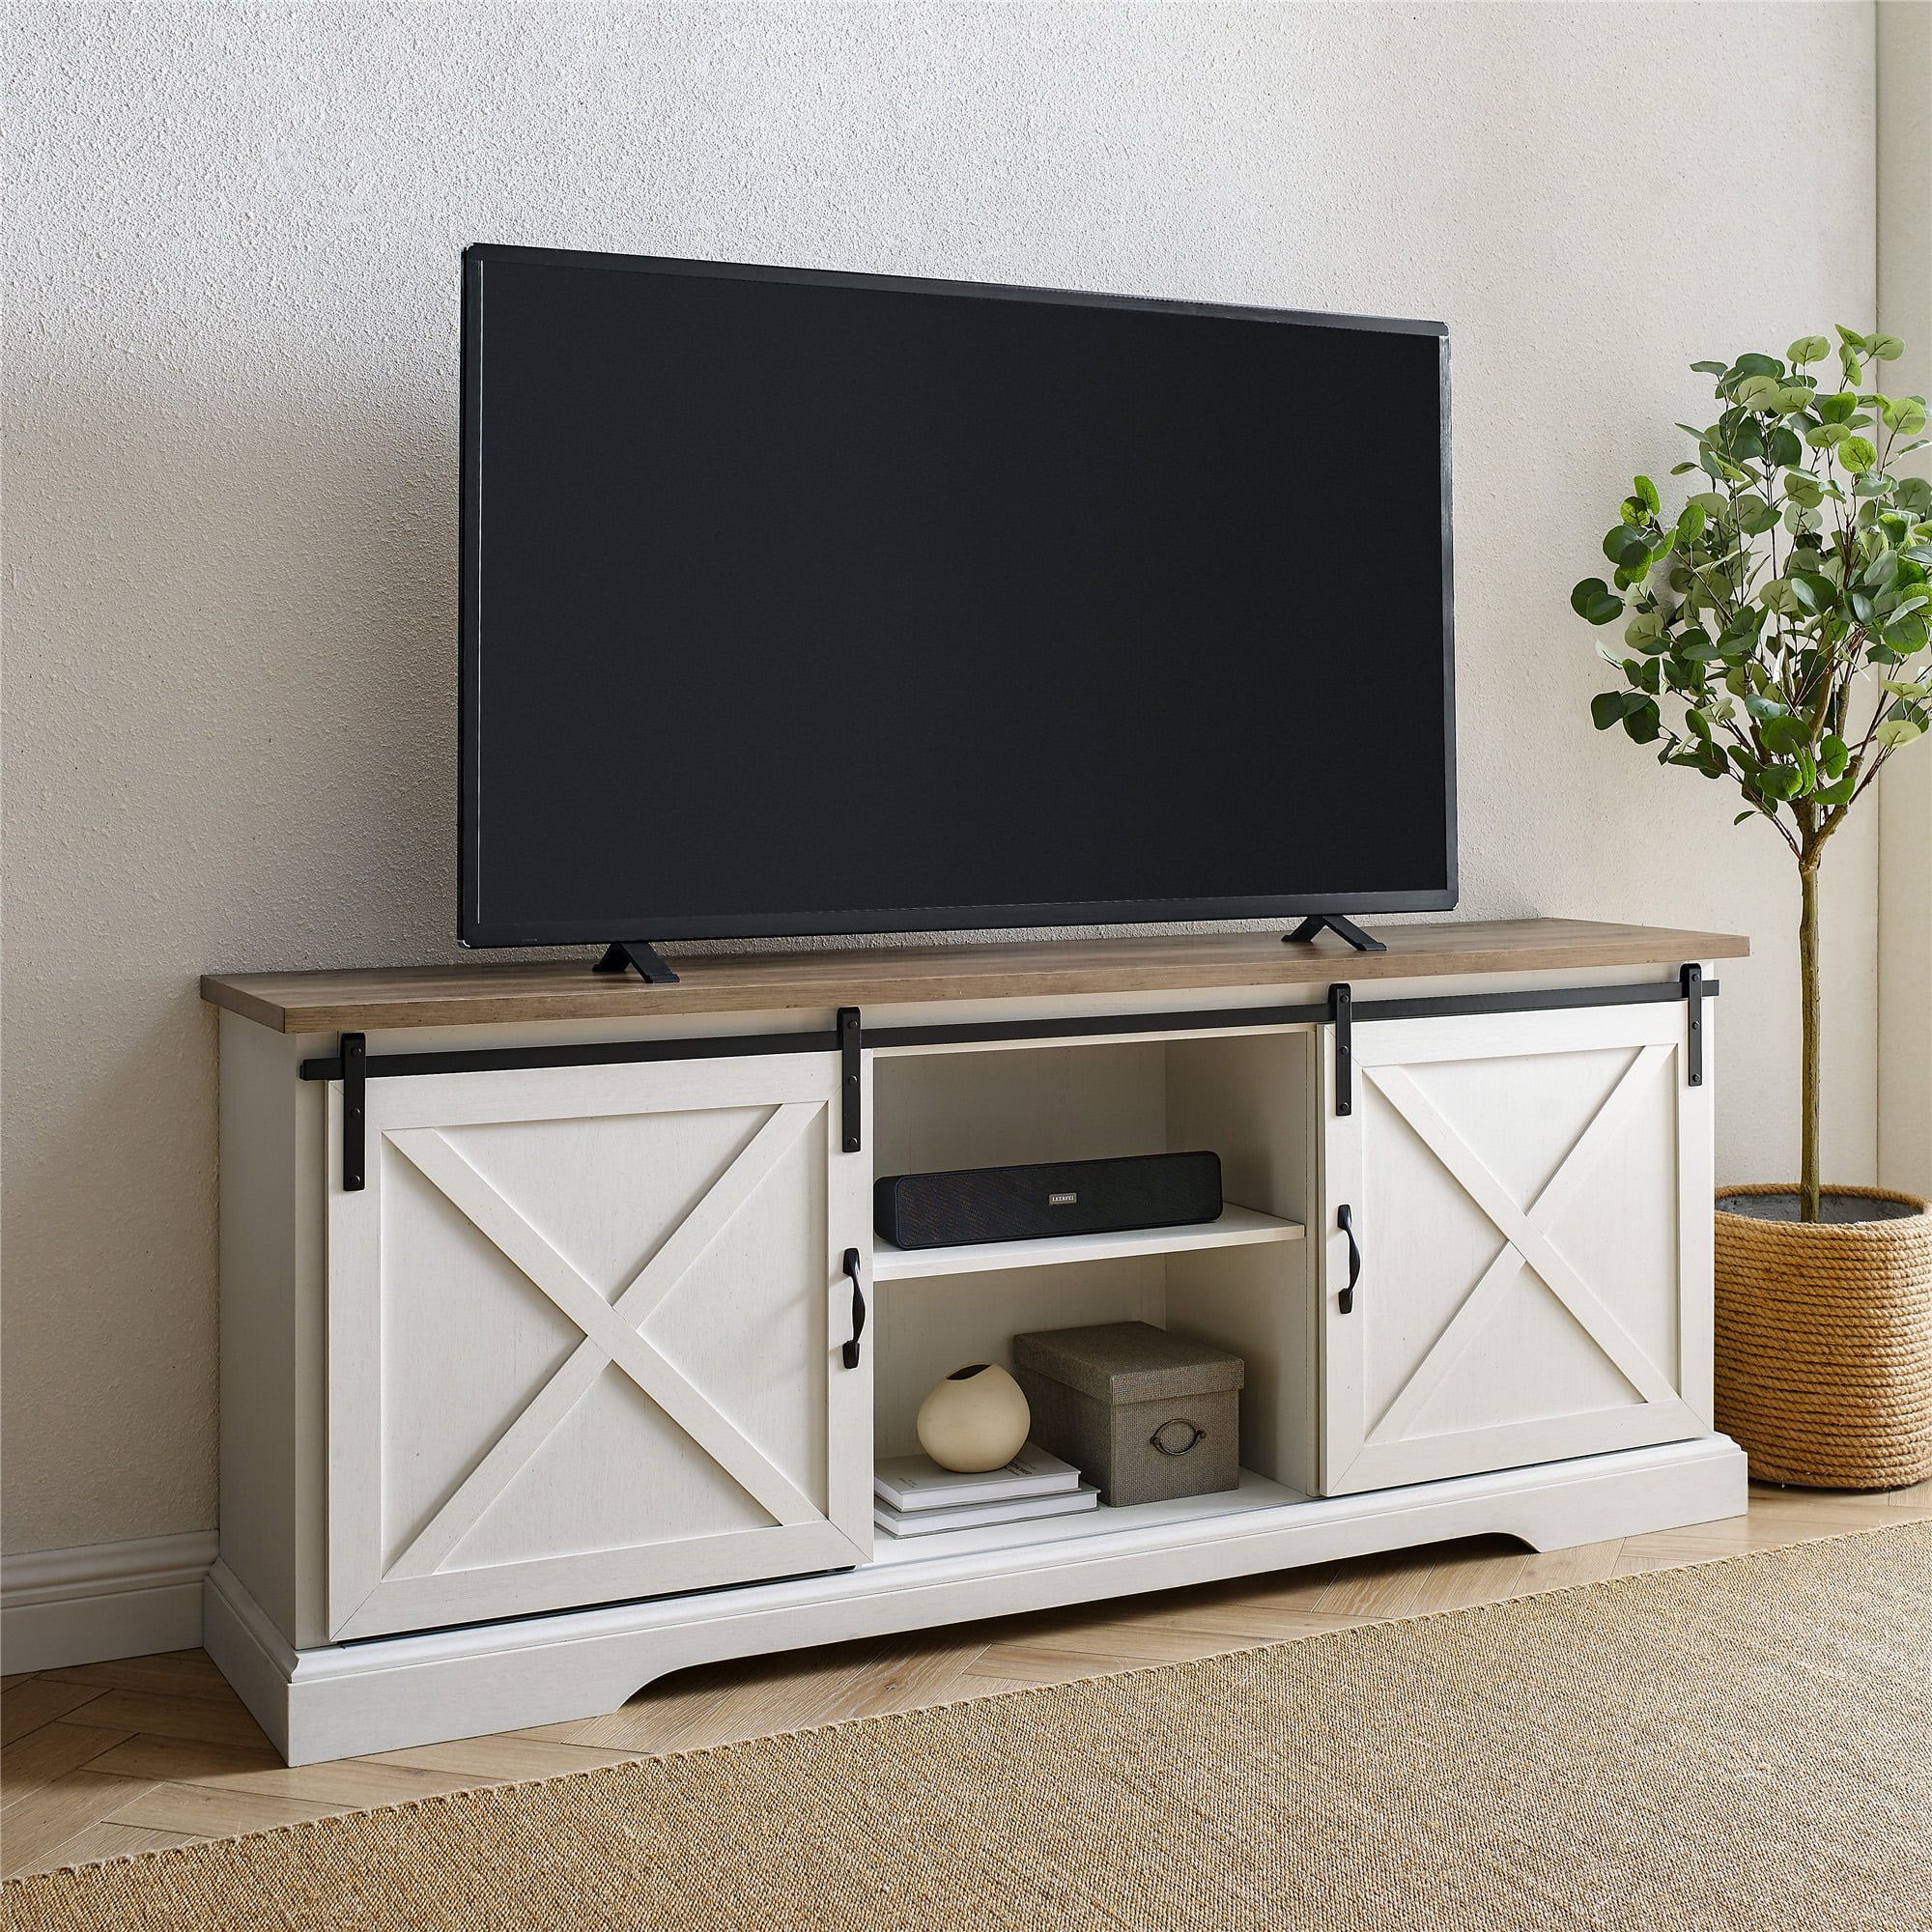 Manor Park Sliding Door Tv Stand For Tvs Up To 80", White/barnwood Throughout White Tv Stands Entertainment Center (Gallery 11 of 20)